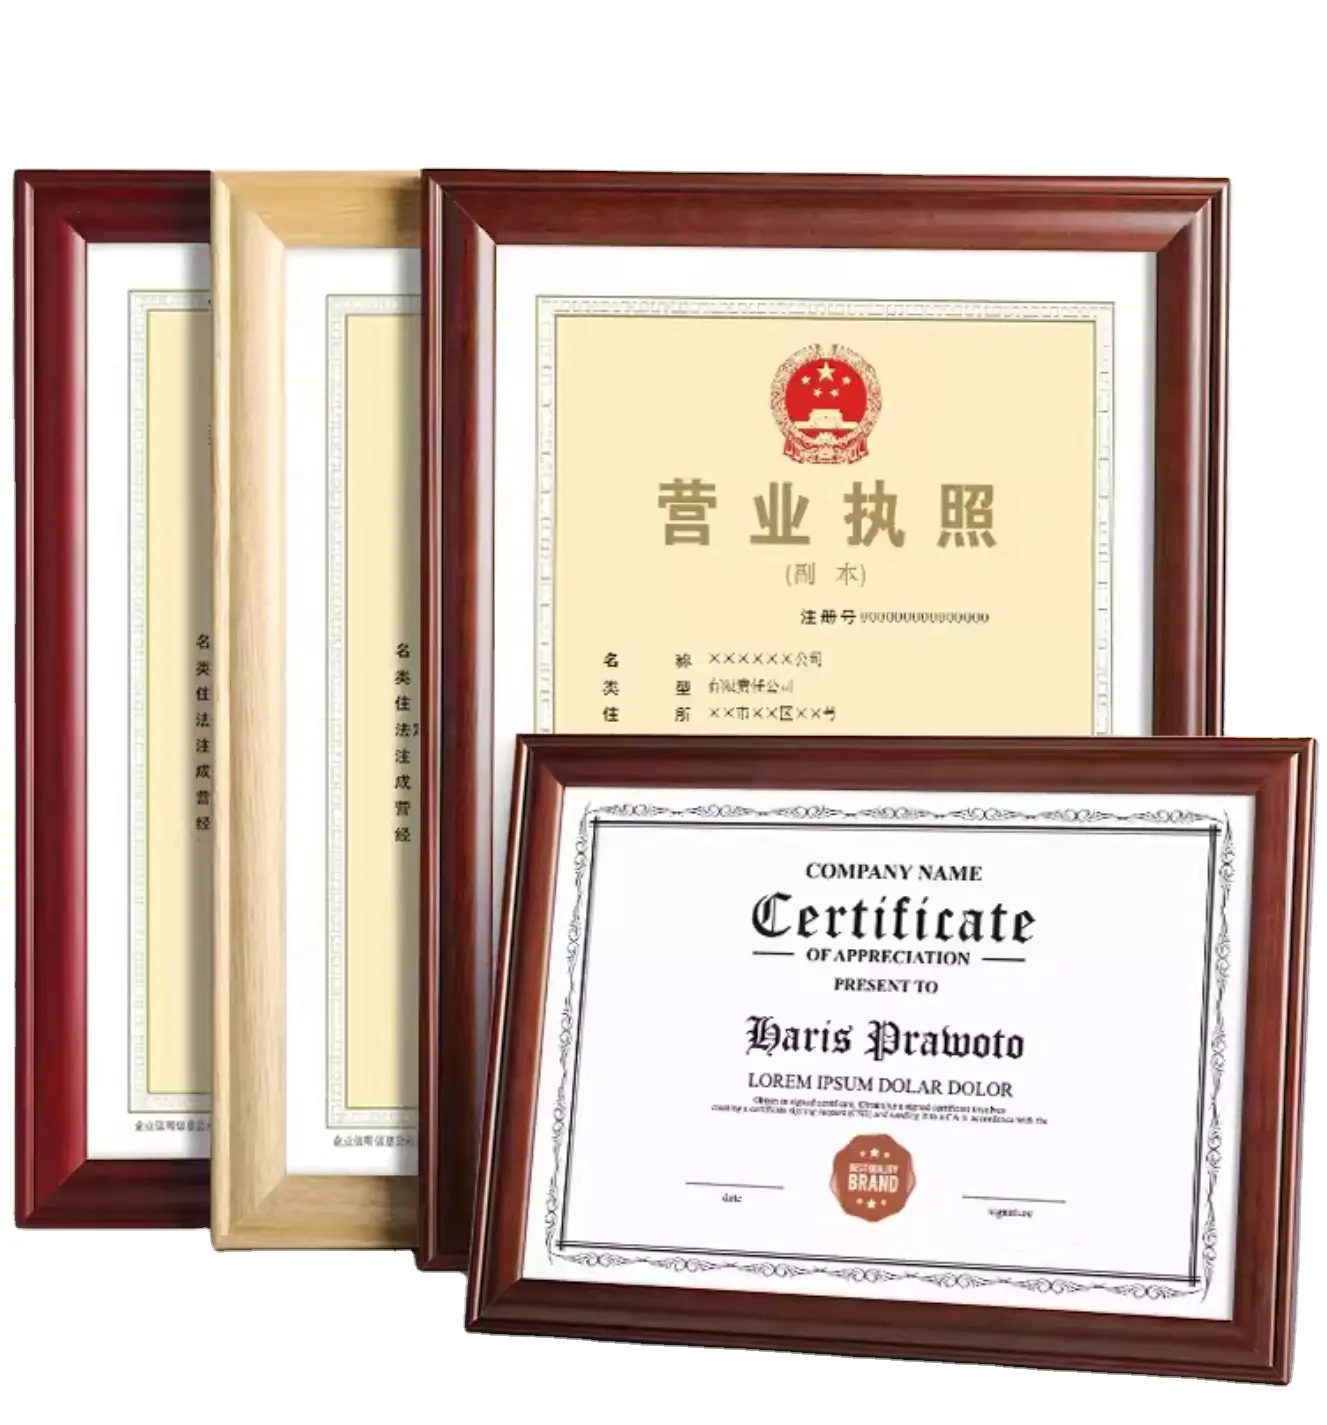 Brand Authorization Business license college graduation certificate document treasured family photo solid walnut photo frame